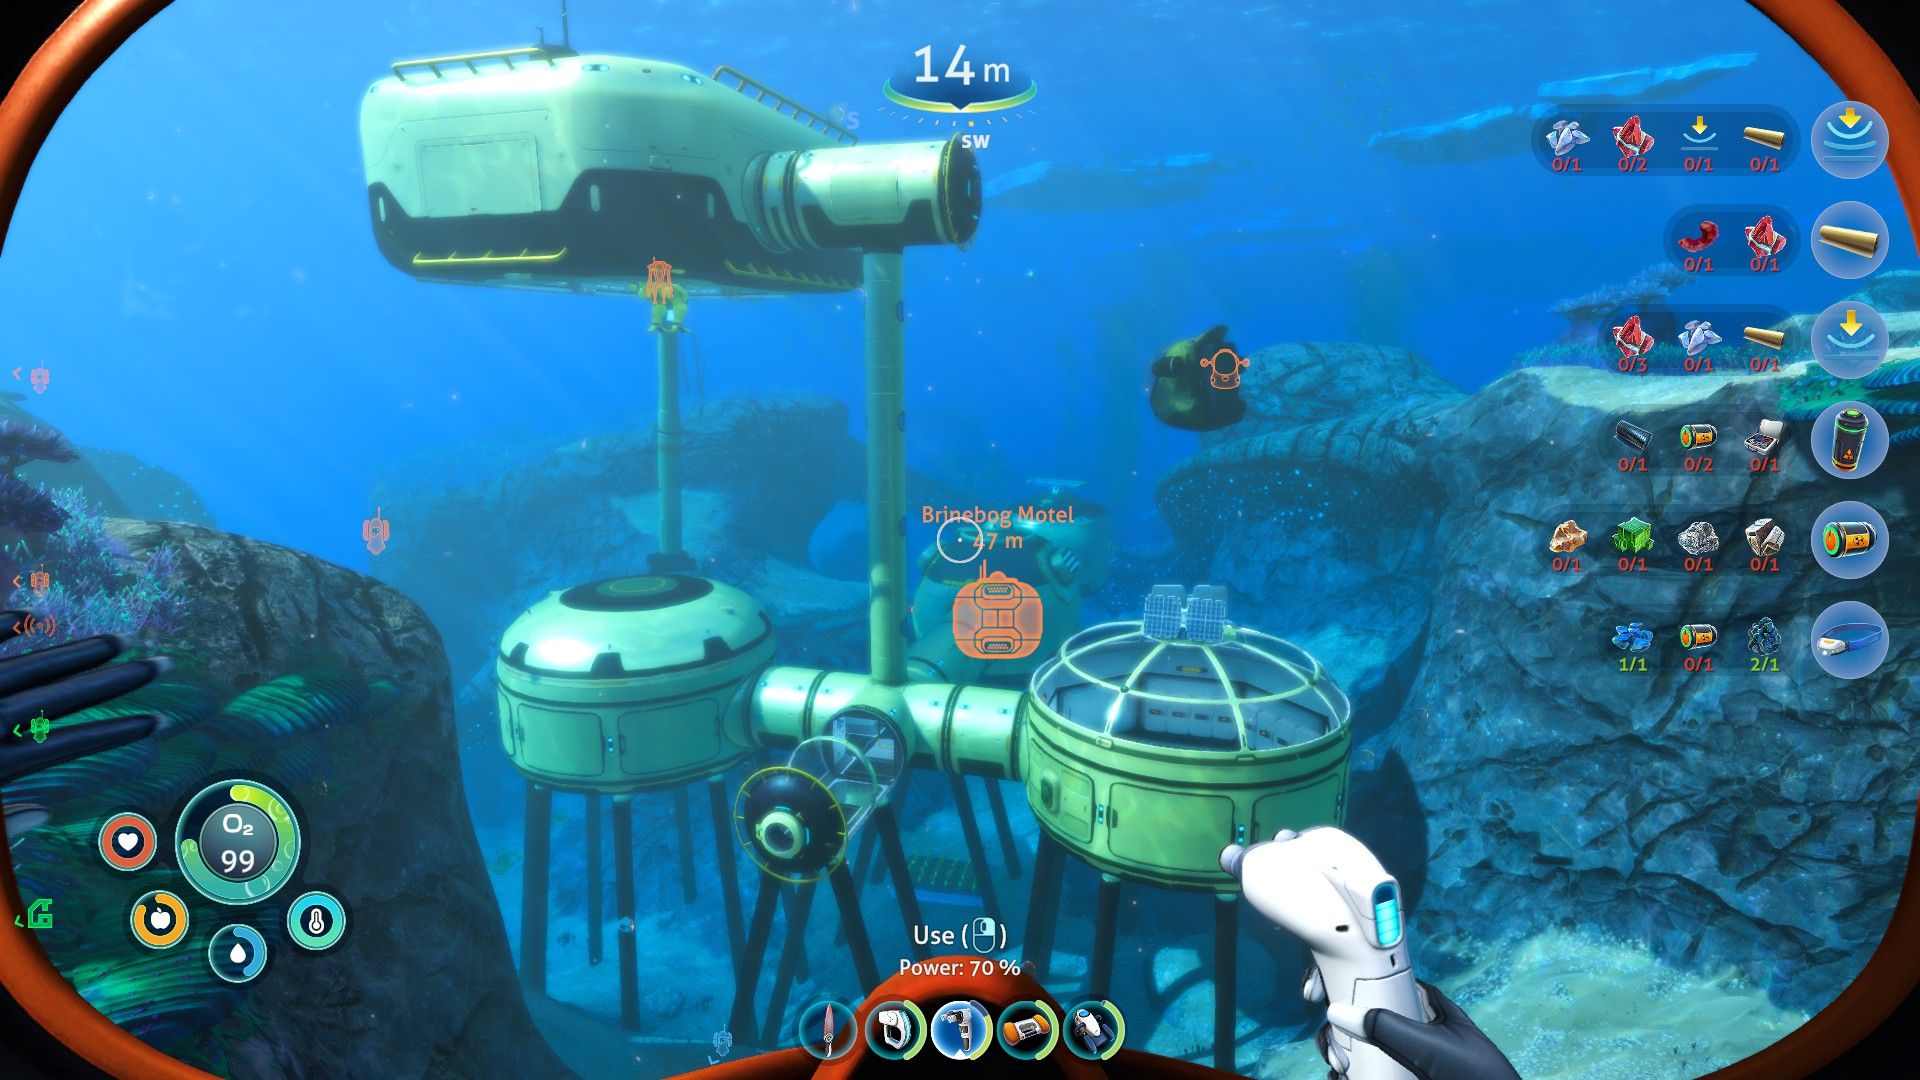 will there be another subnautica game after below zero